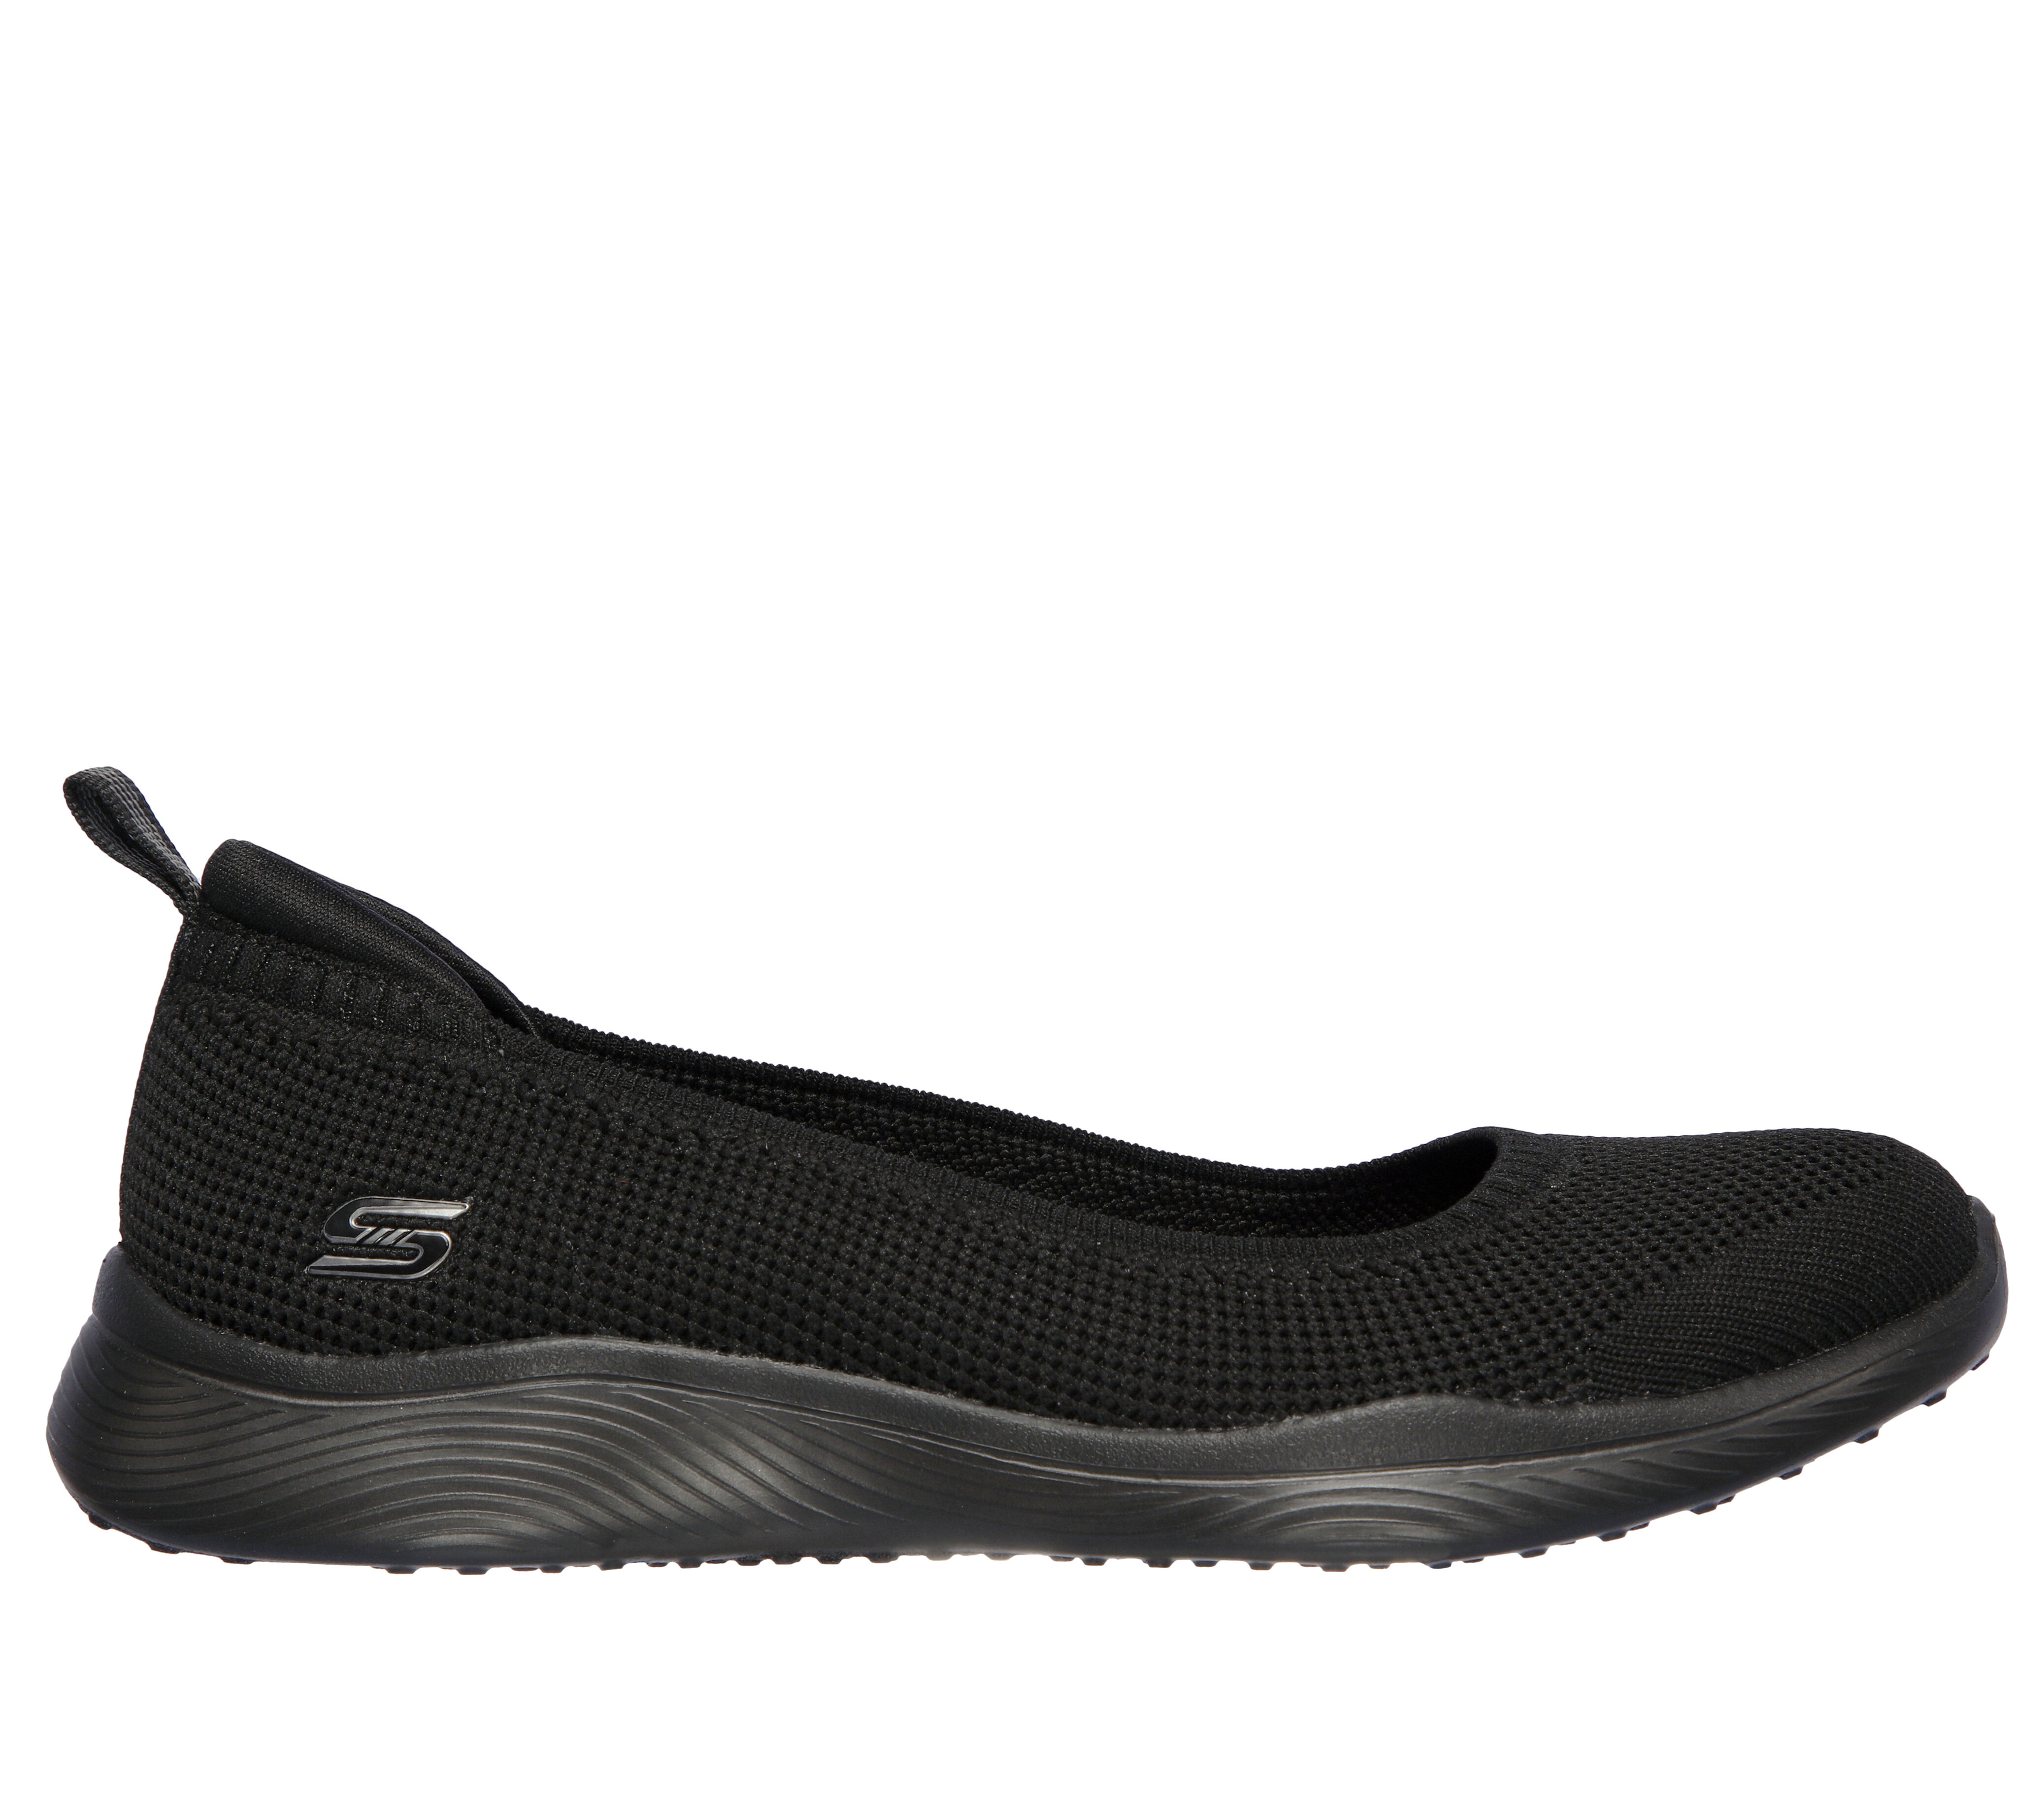 Right Time in White Black Womens Flats and flat shoes Skechers Flats and flat shoes Skechers Pop Ups Black - Save 23% 